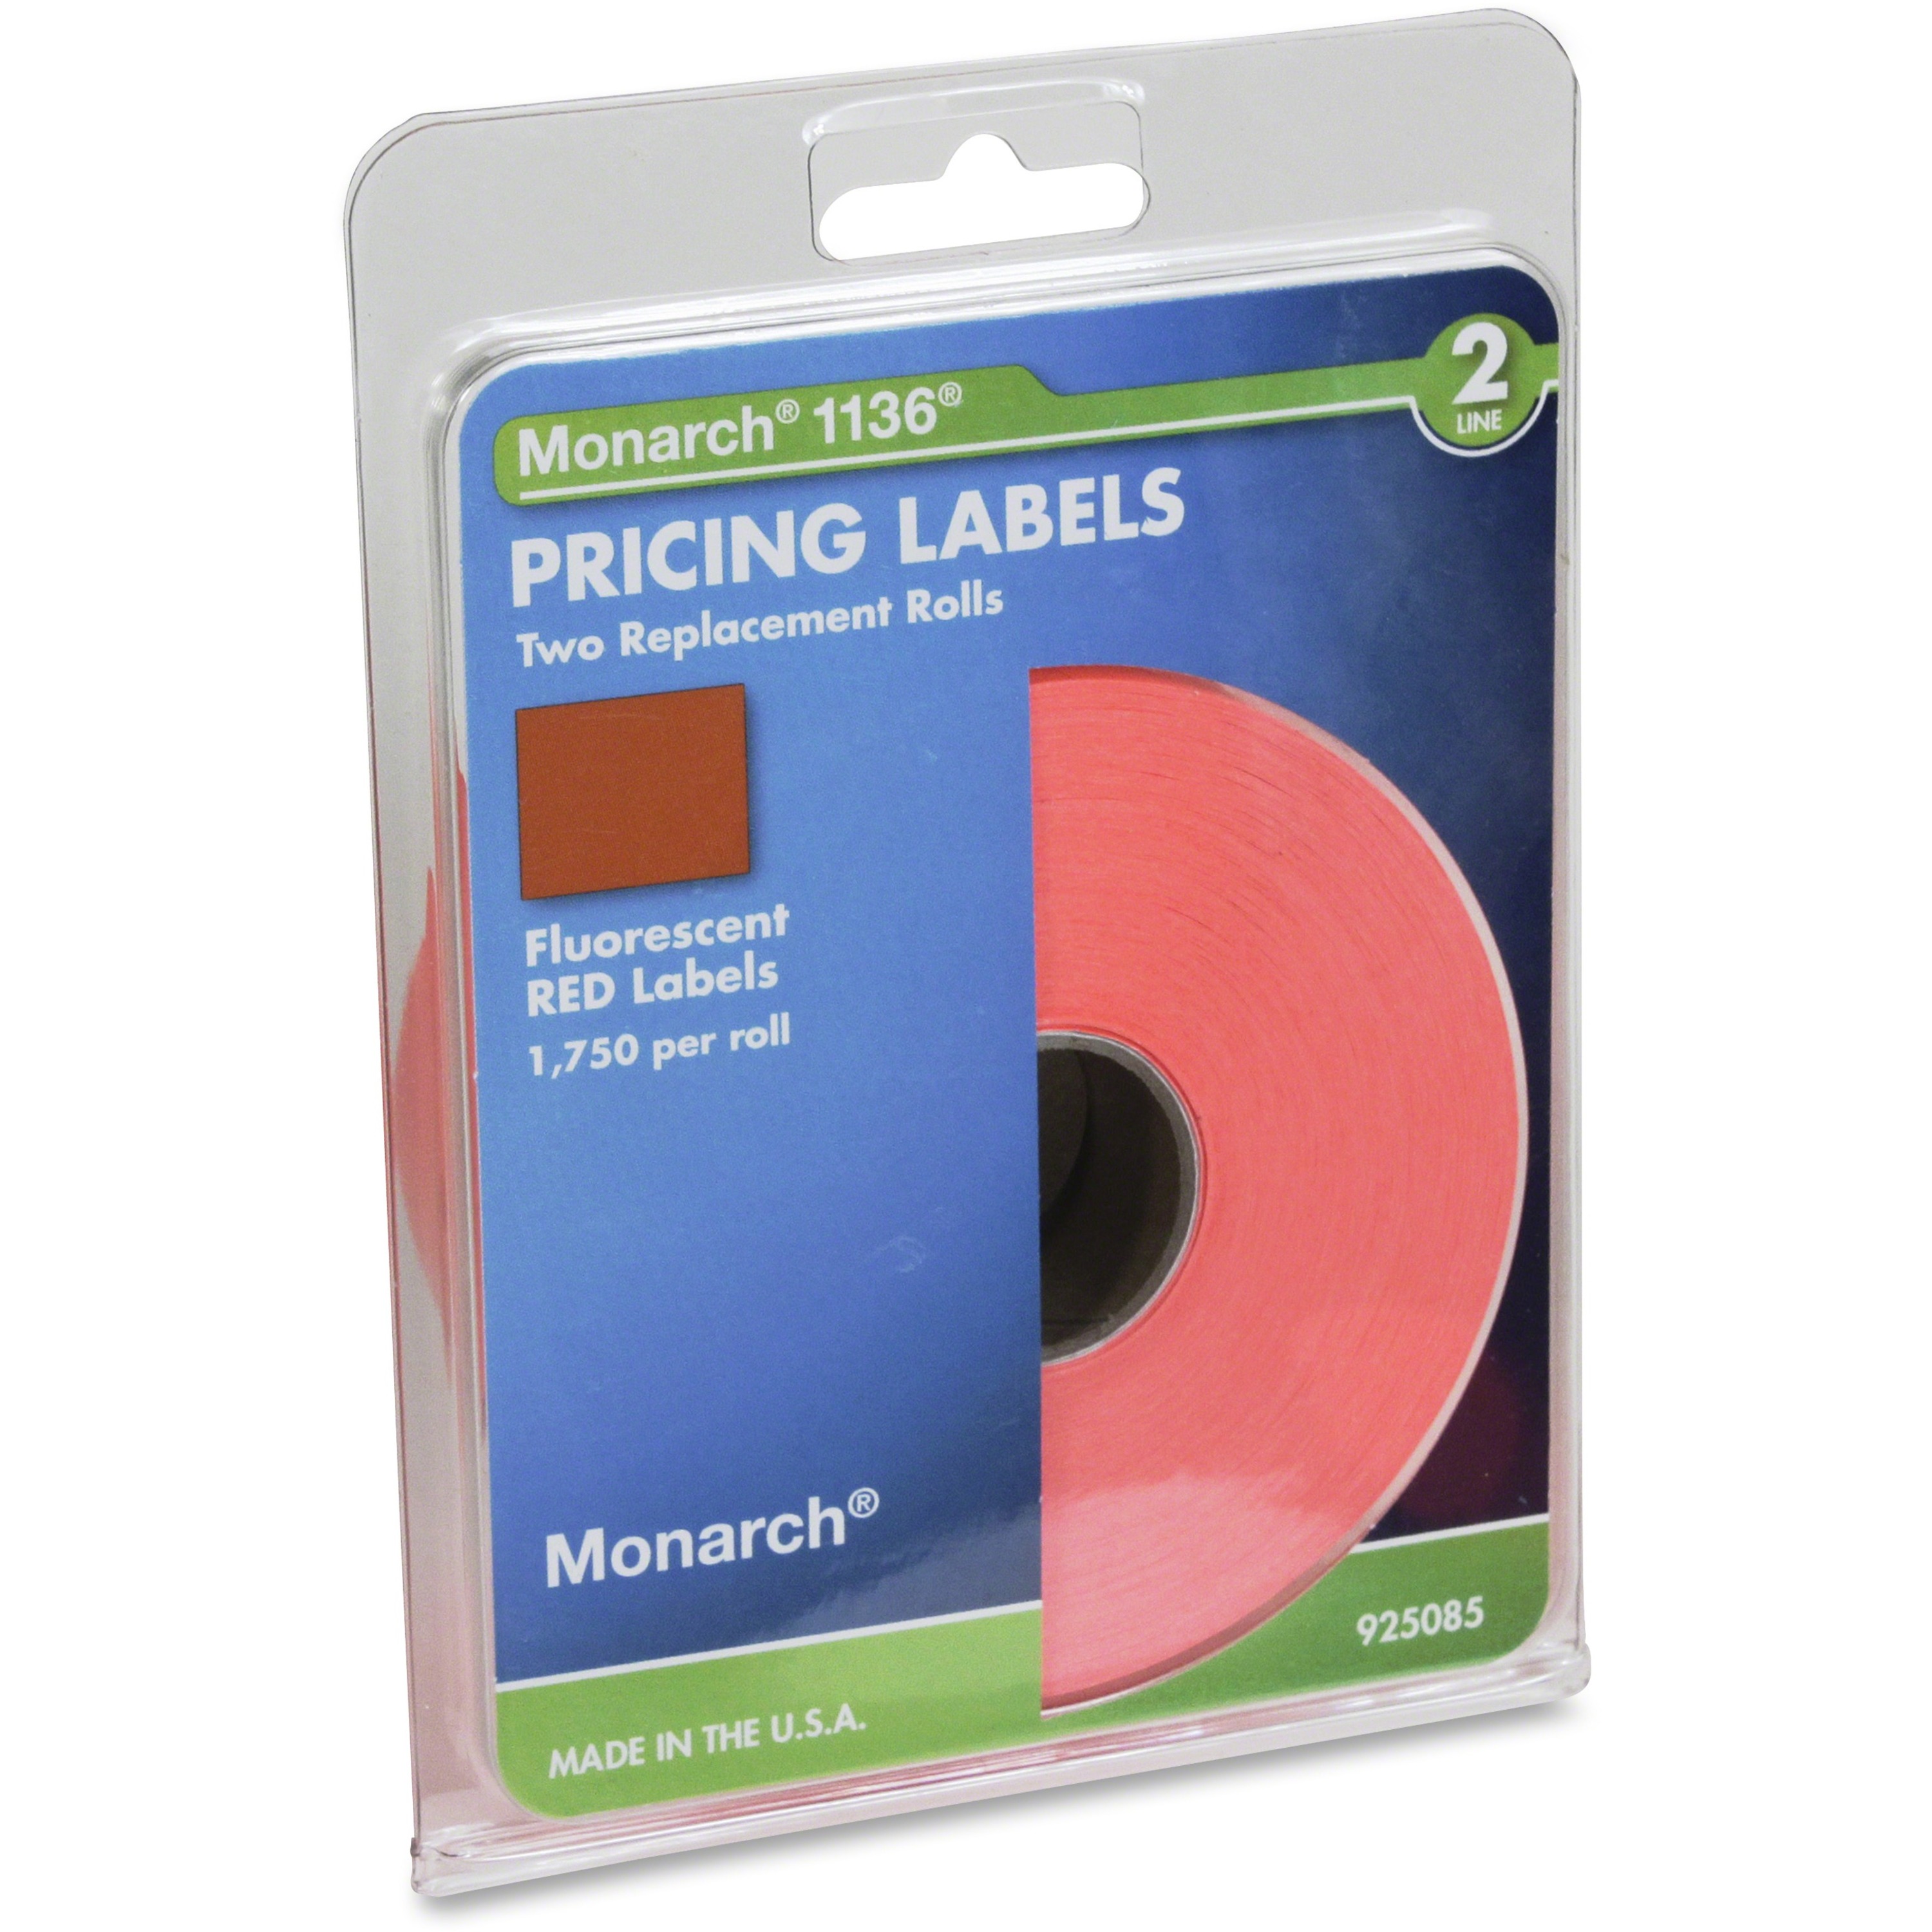 White Monarch Easy-Load 1136 Two-Line Pricemarker Labels 3500/Pack, 5/8 x 7/8 